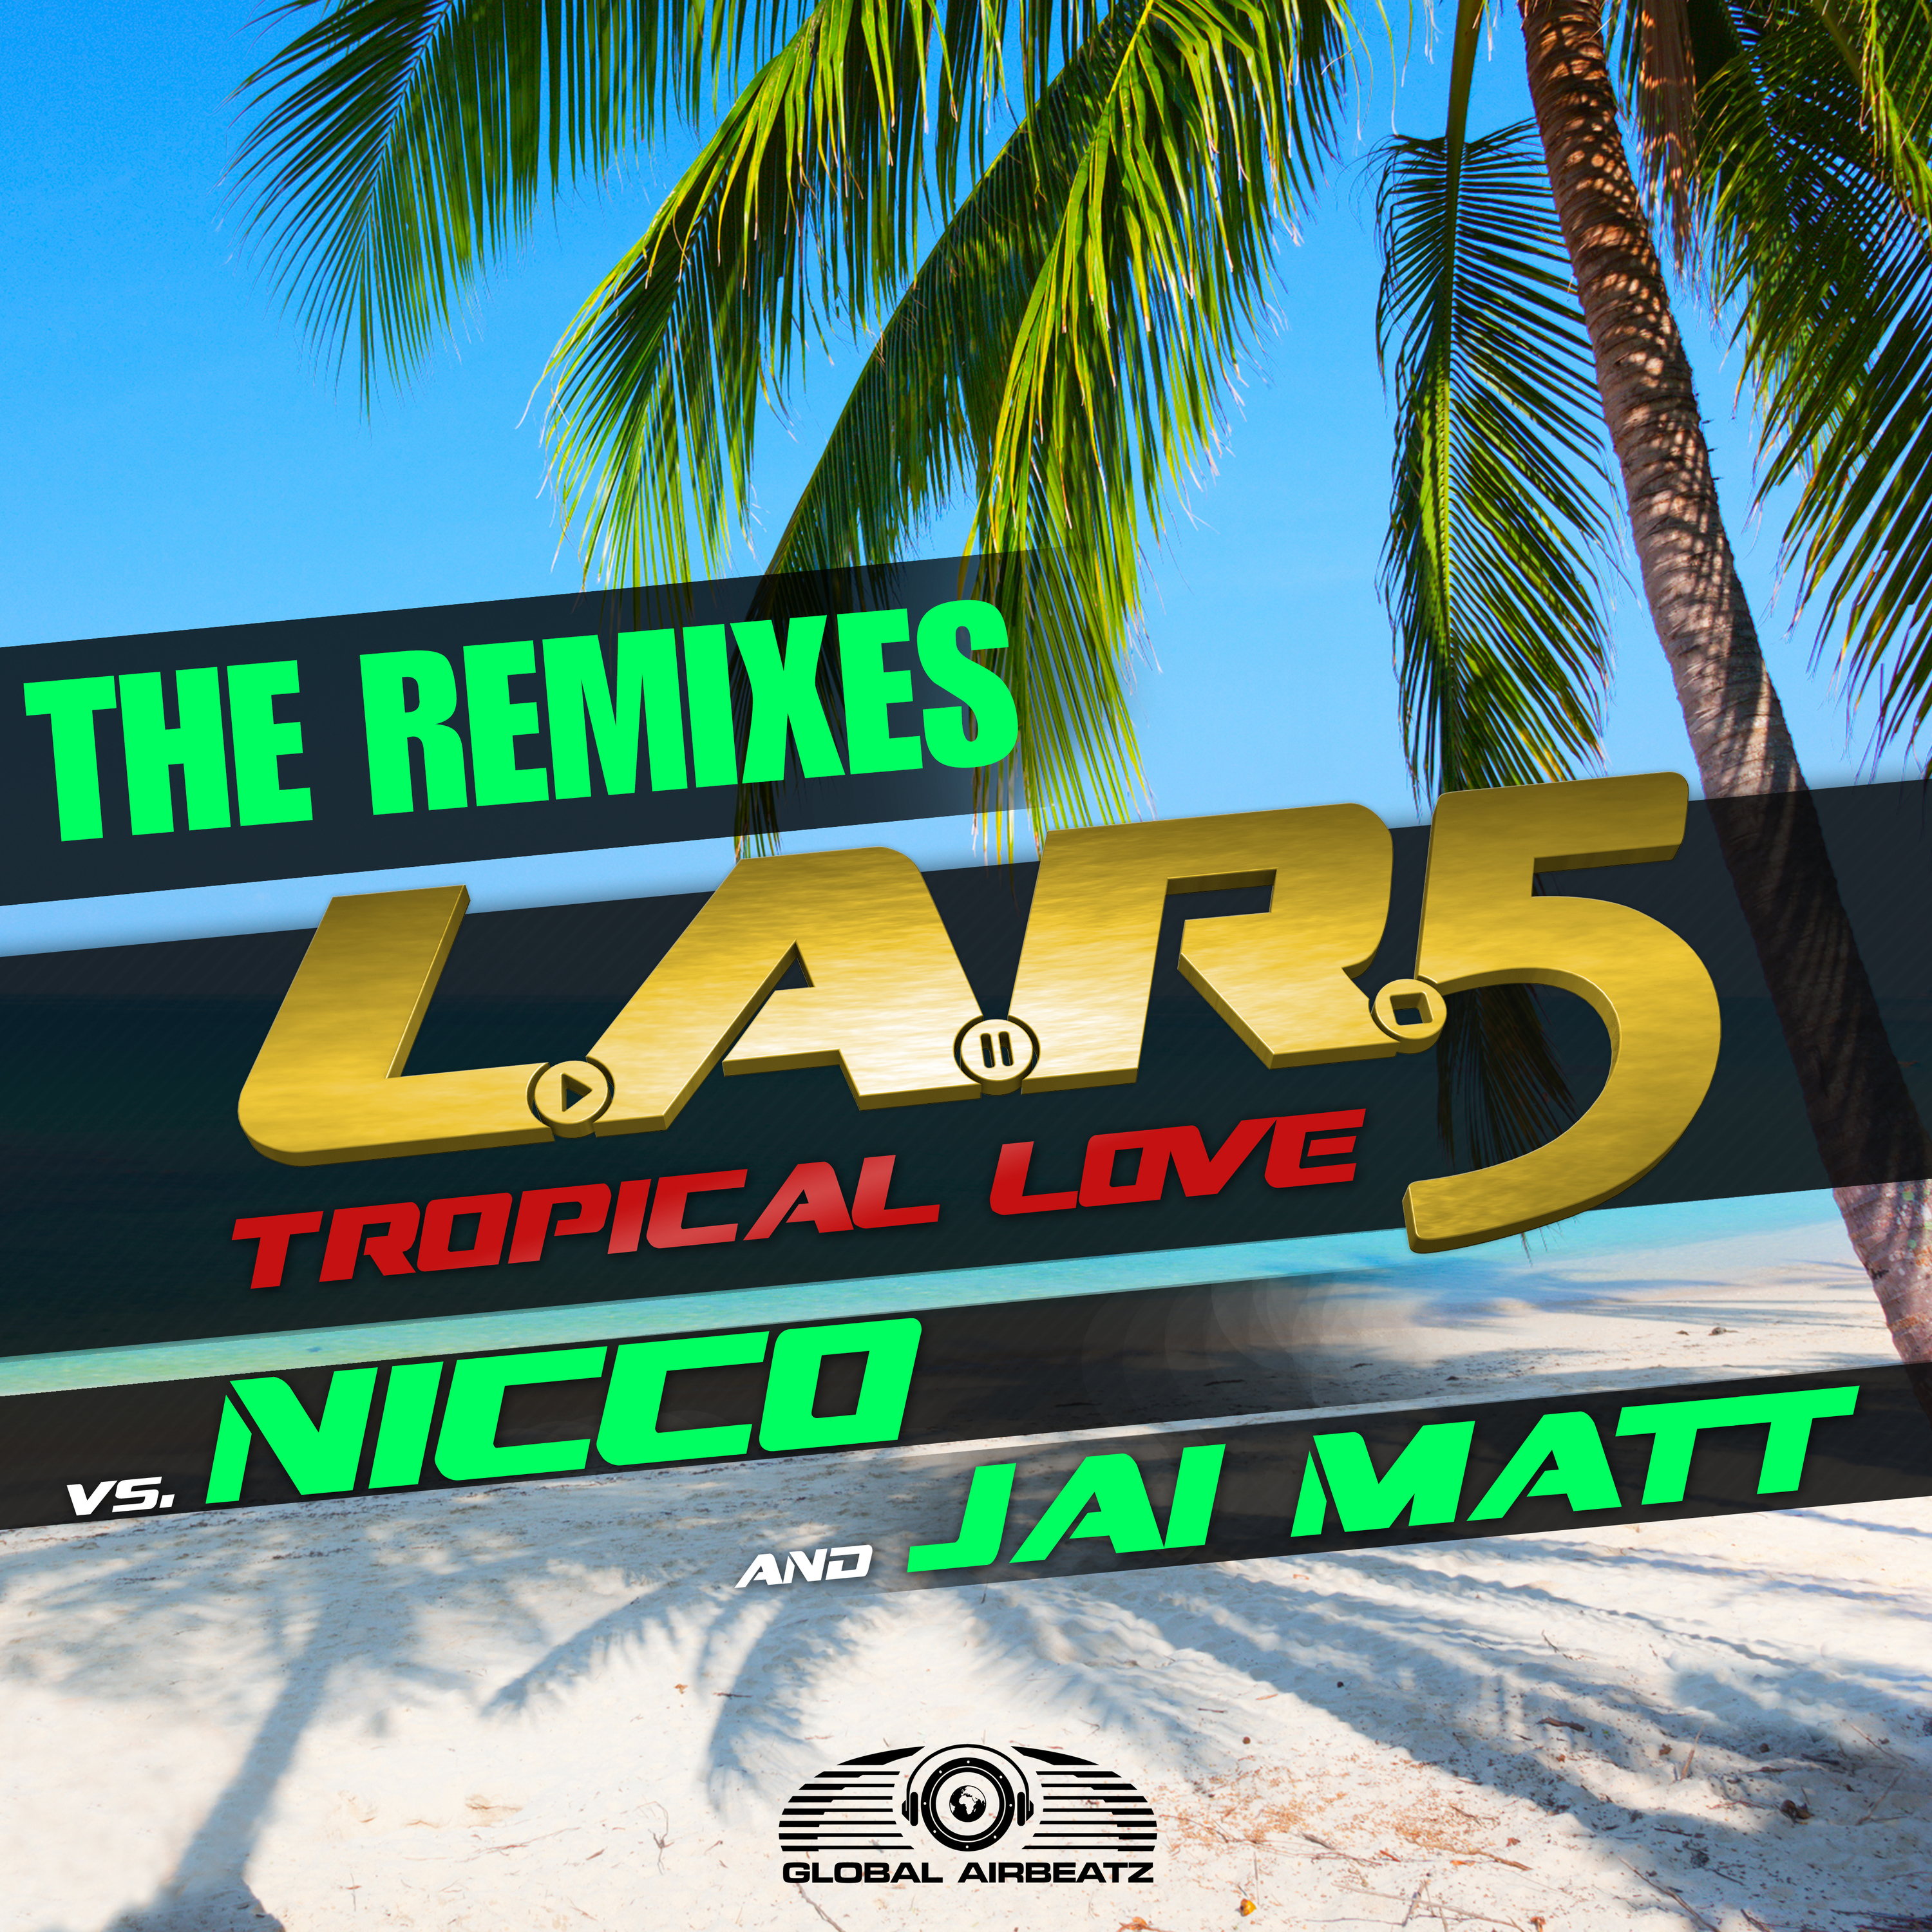 Tropical Love (The Remixes)